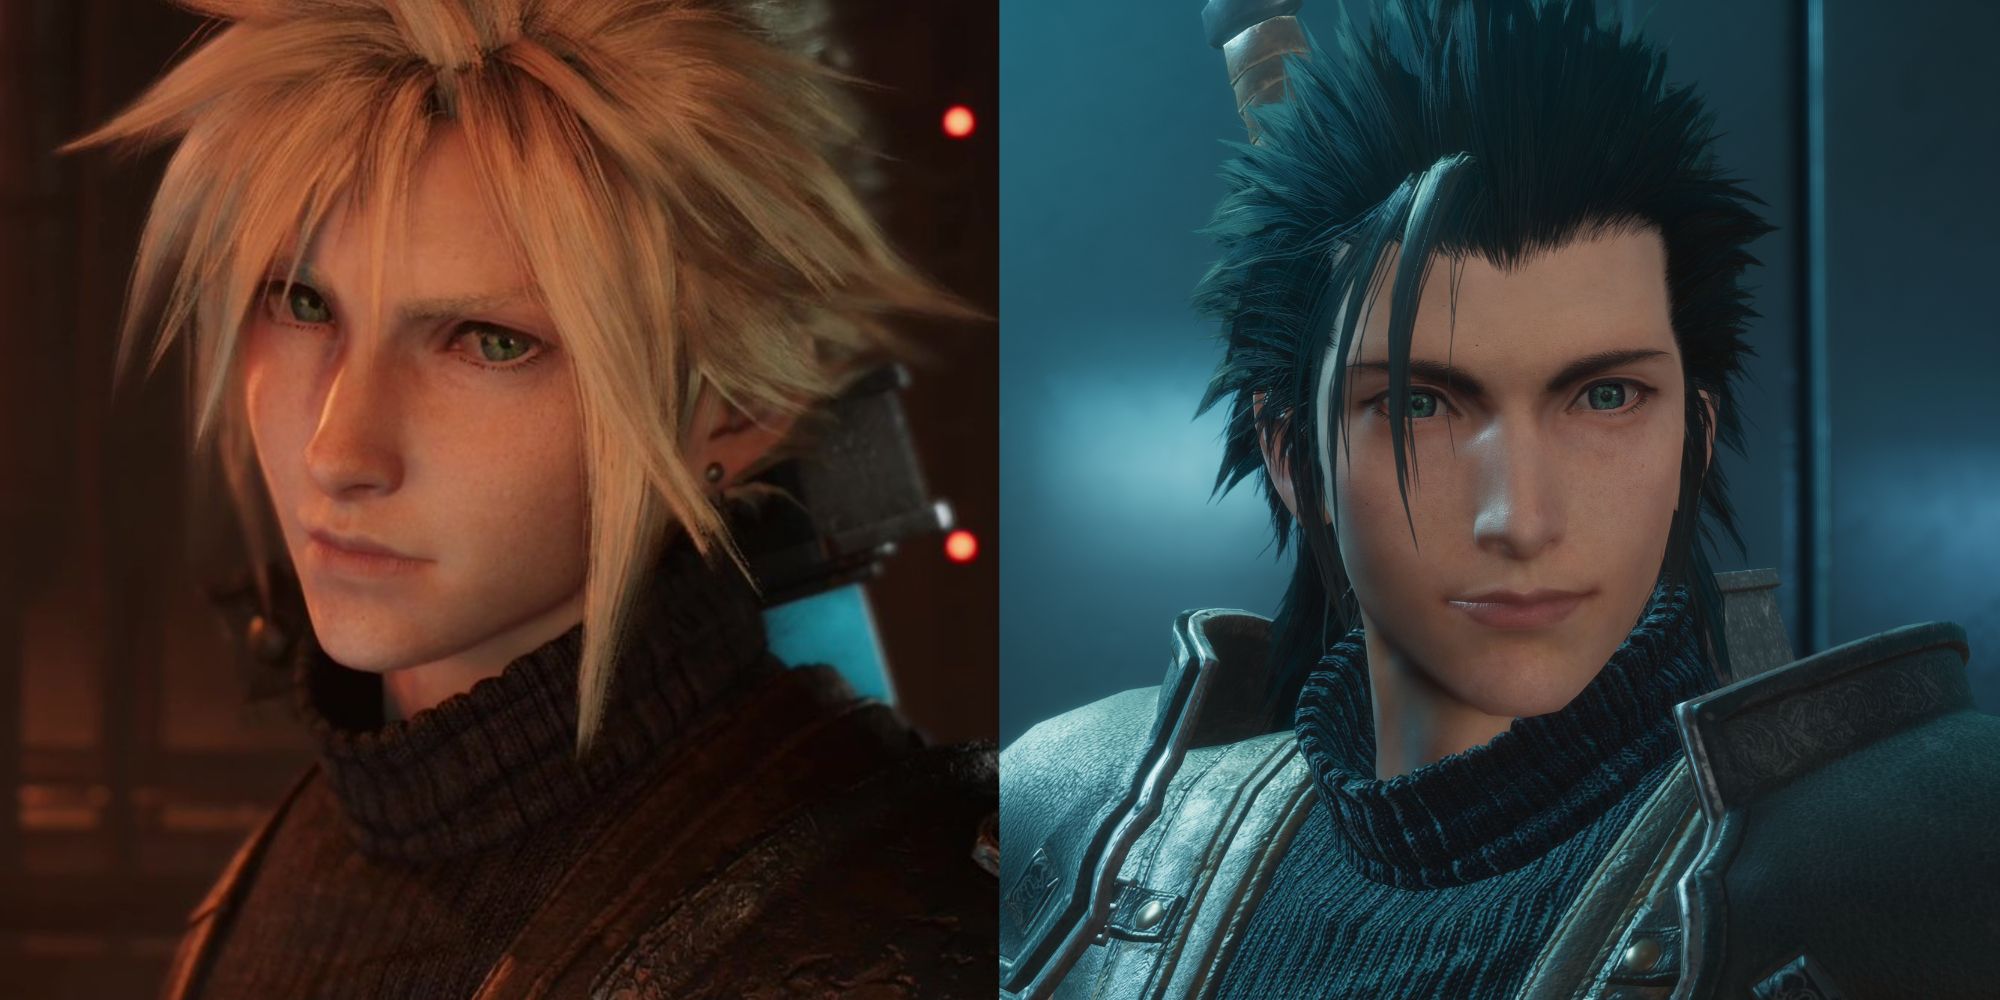 Cloud Strife from Final Fantasy 7 Remake (Left) and Zack Fair from Crisis Core: Final Fantasy 7 Reunion (Right)